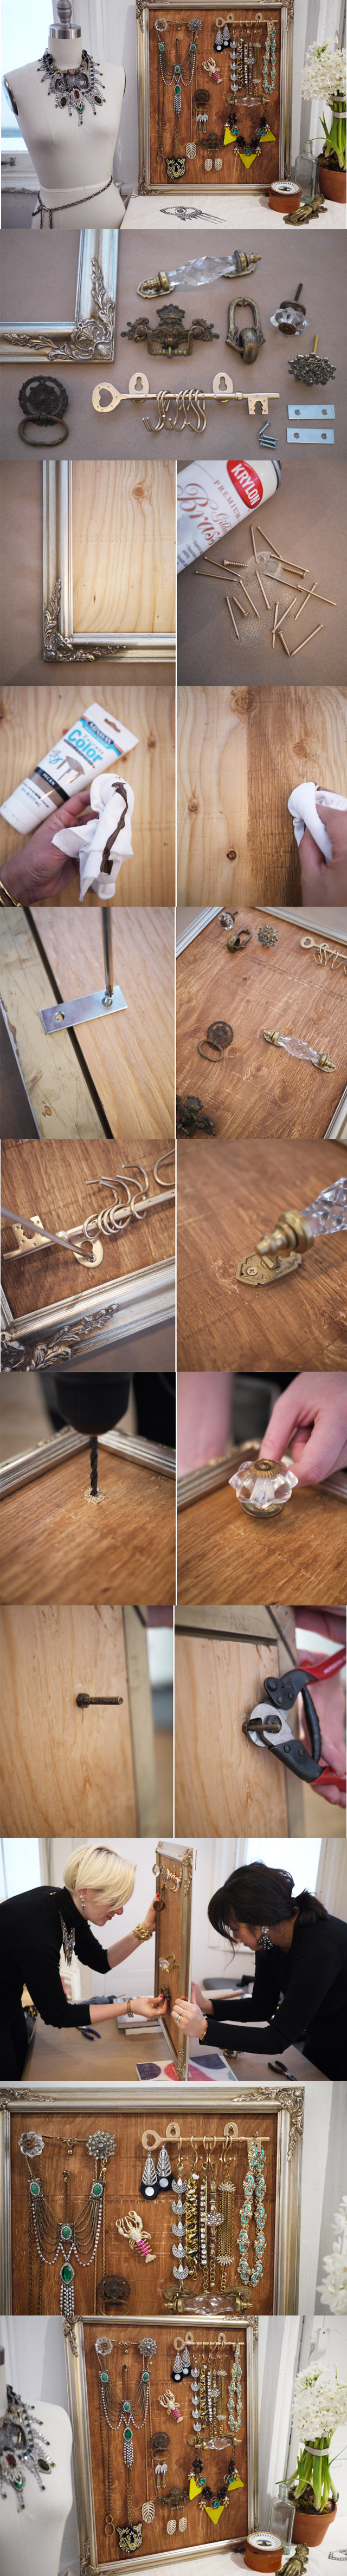 12 Interesting And Useful Daily DIY Ideas